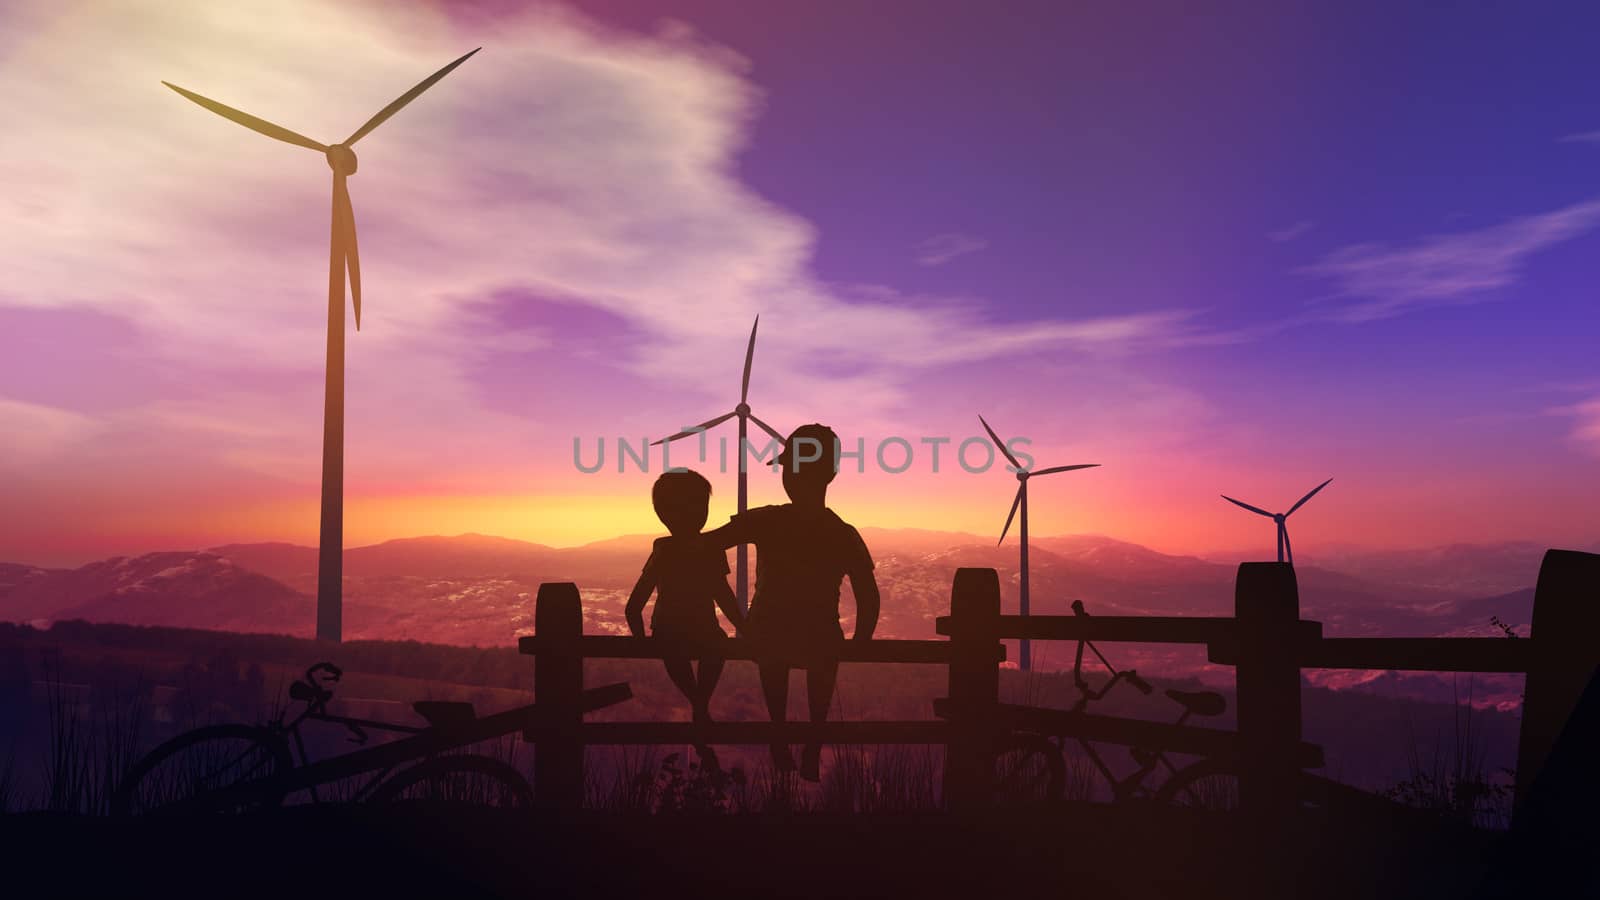 Children sitting on the fence and watching the wind power plants work against the sunset sky.